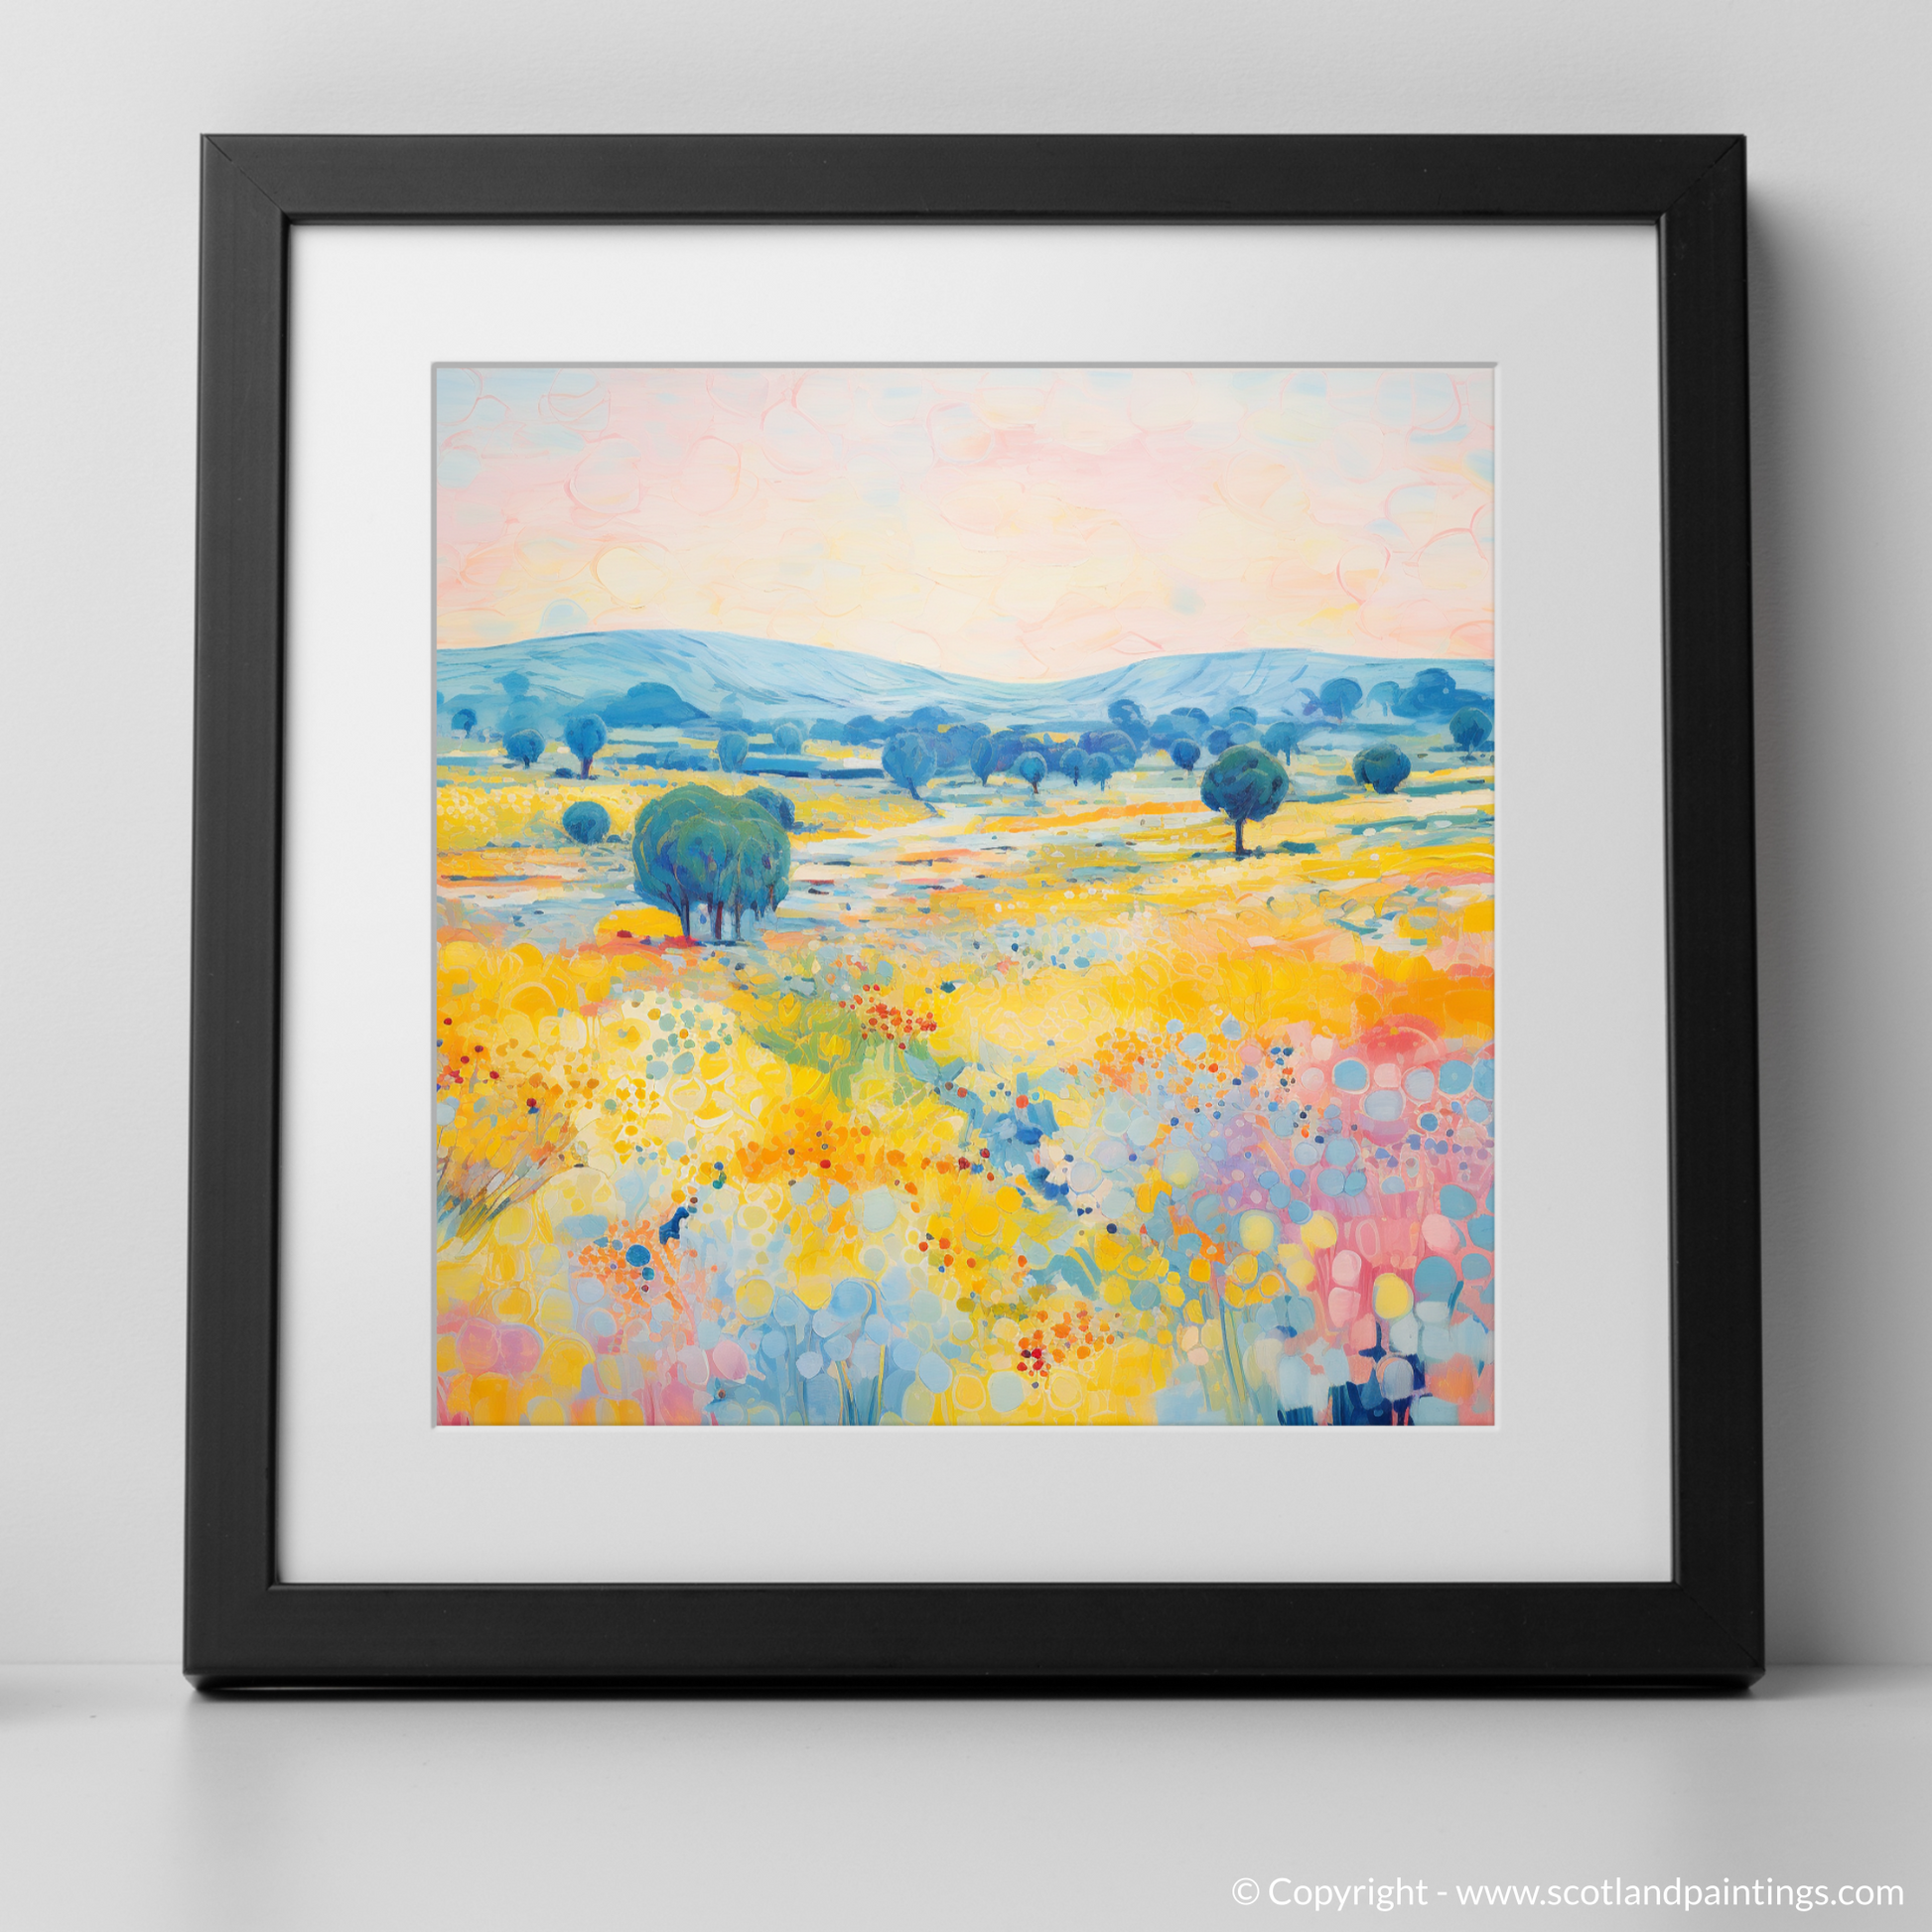 Art Print of Glenesk, Angus in summer with a black frame